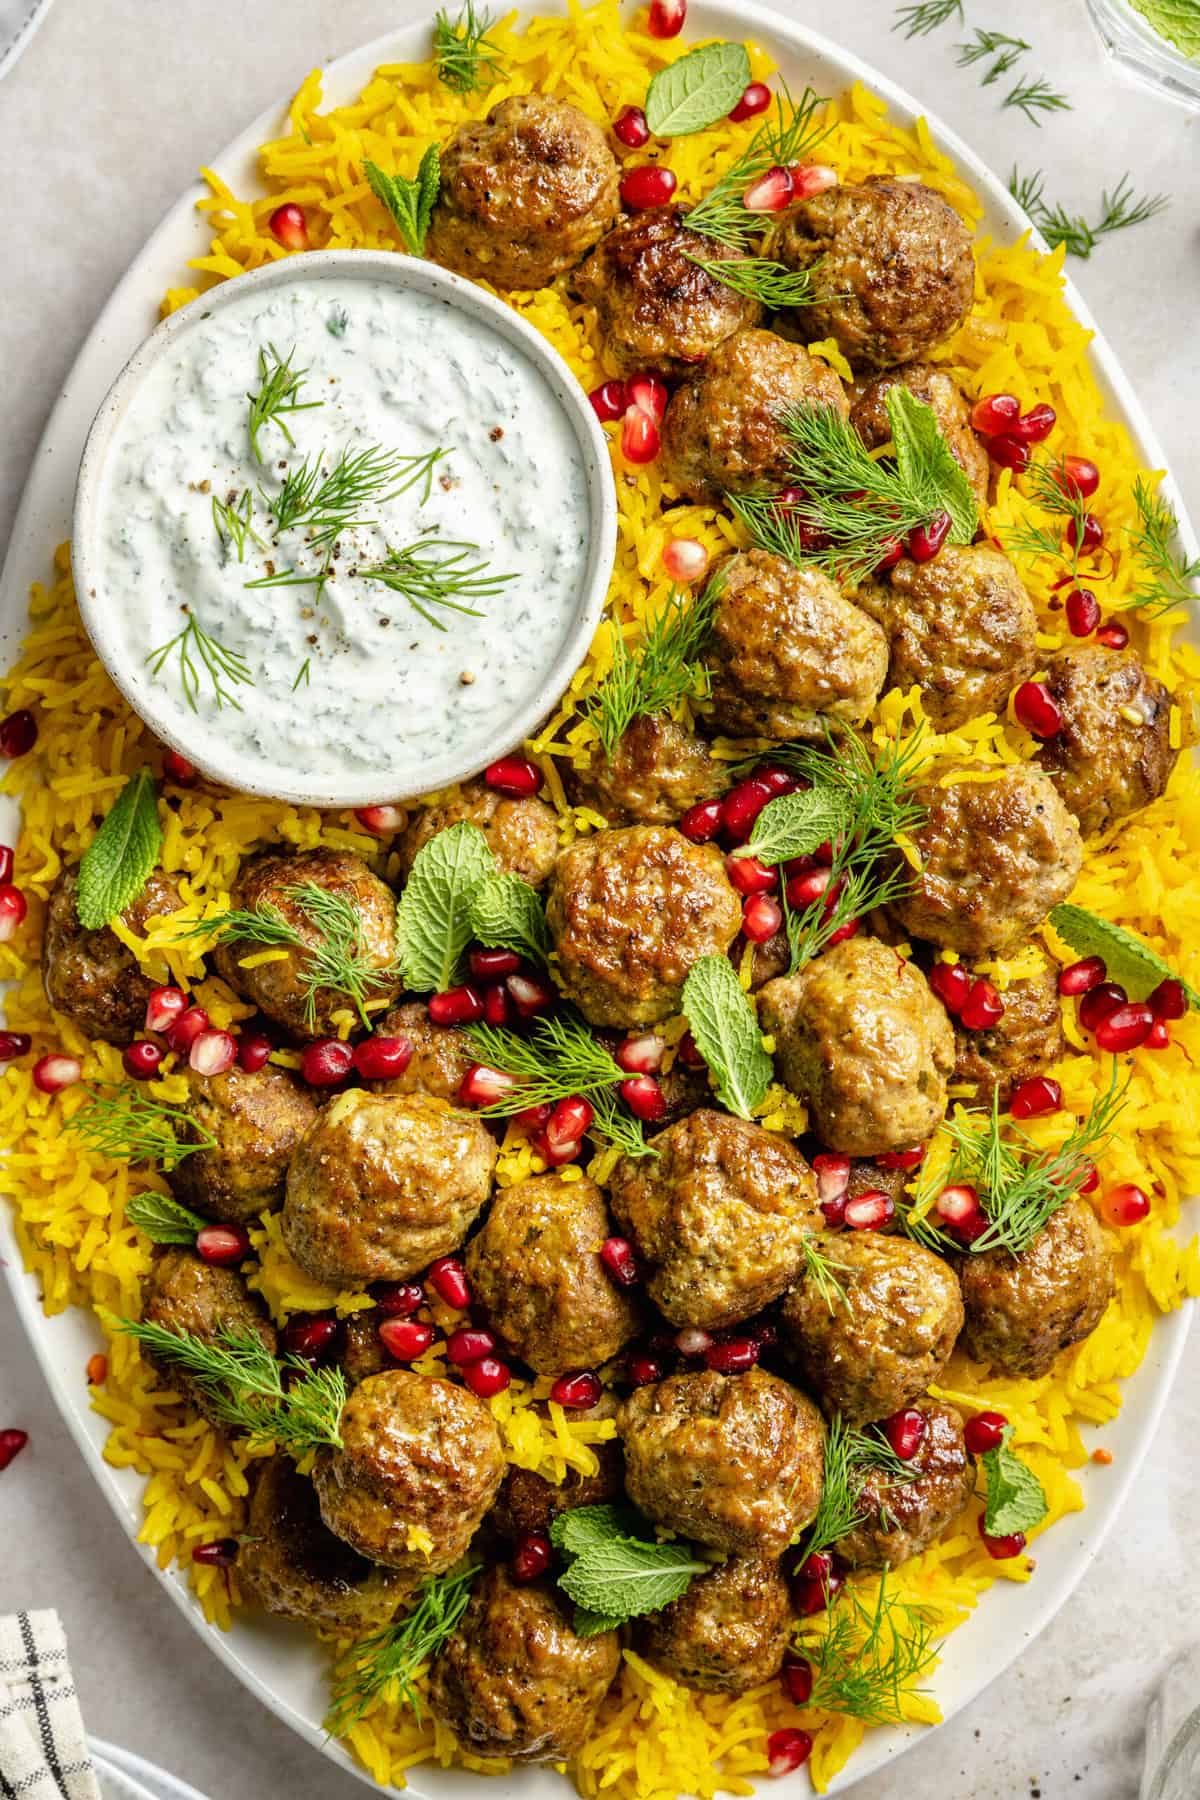 One-Pan Lamb Meatballs and Saffron Rice with Herby-Yogurt Sauce